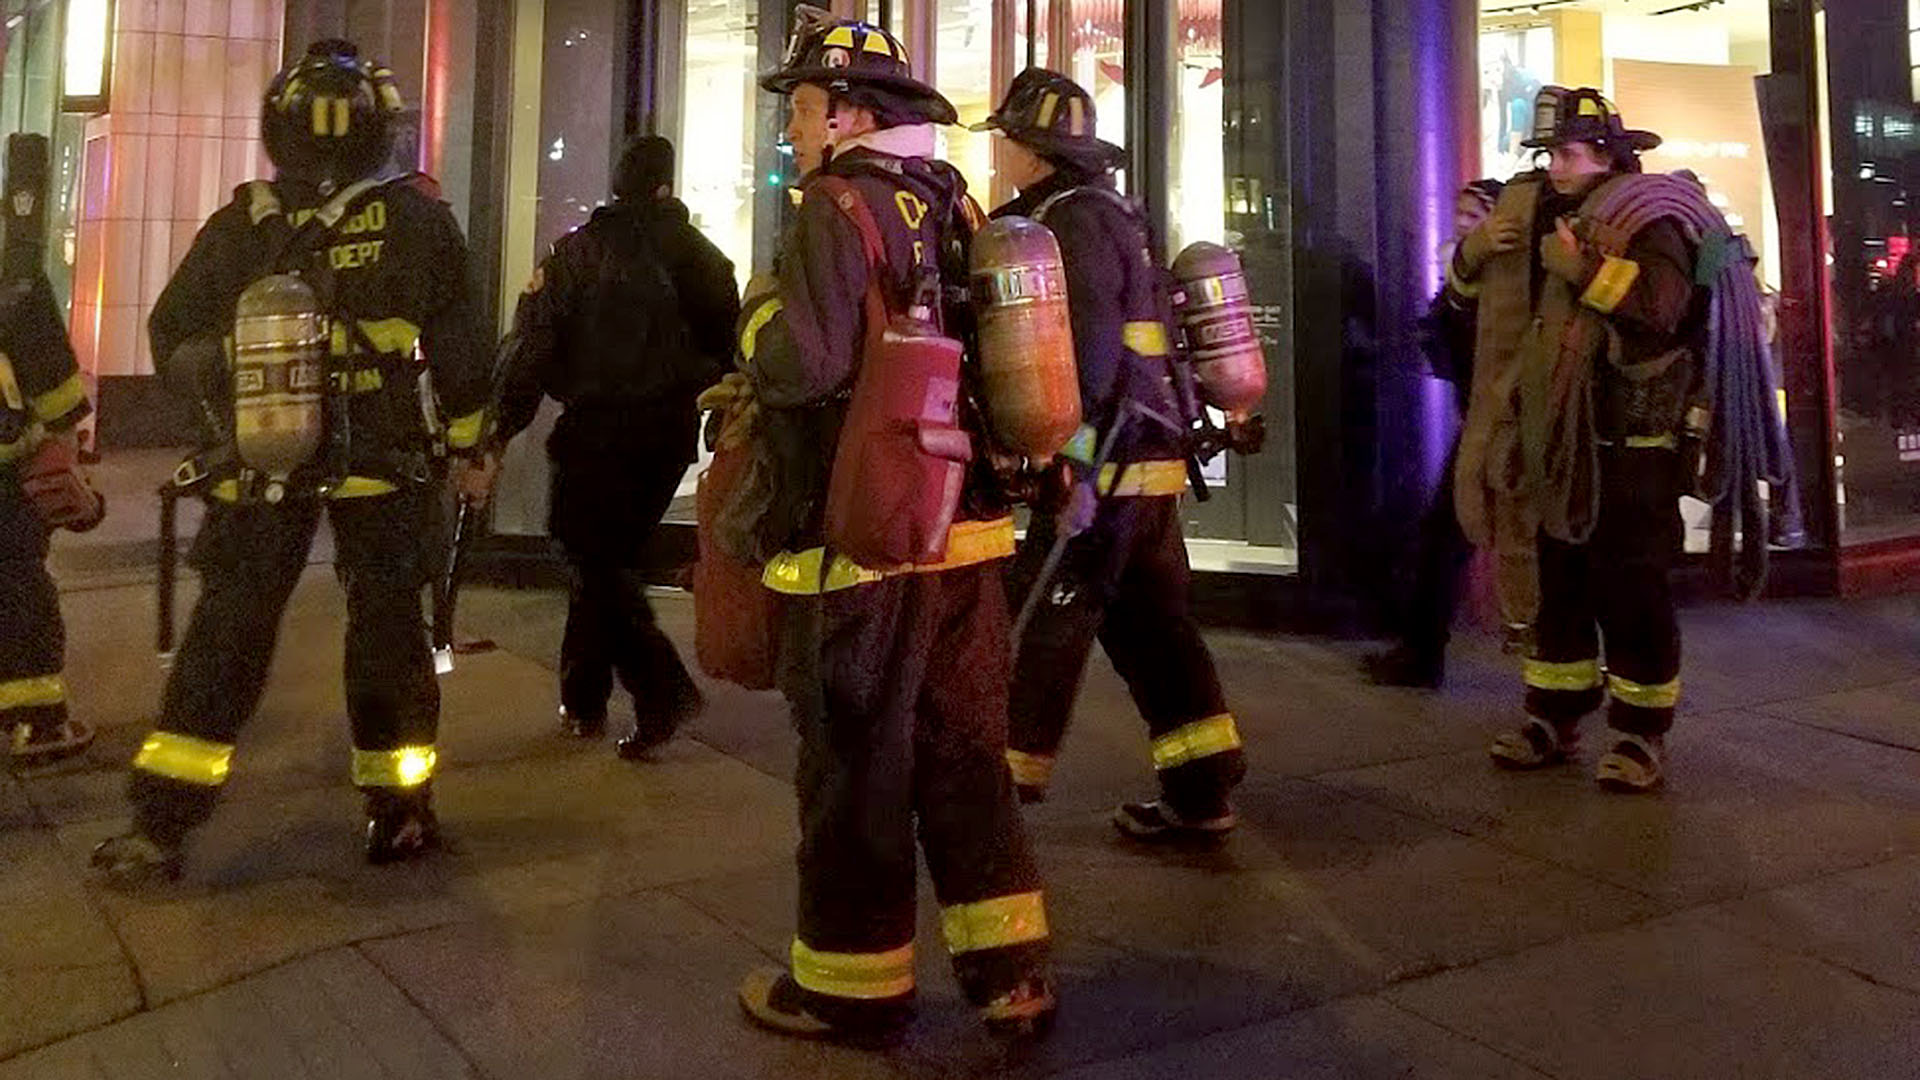 Firefighters respond to a Magnificient Mile call, Chicago. ©